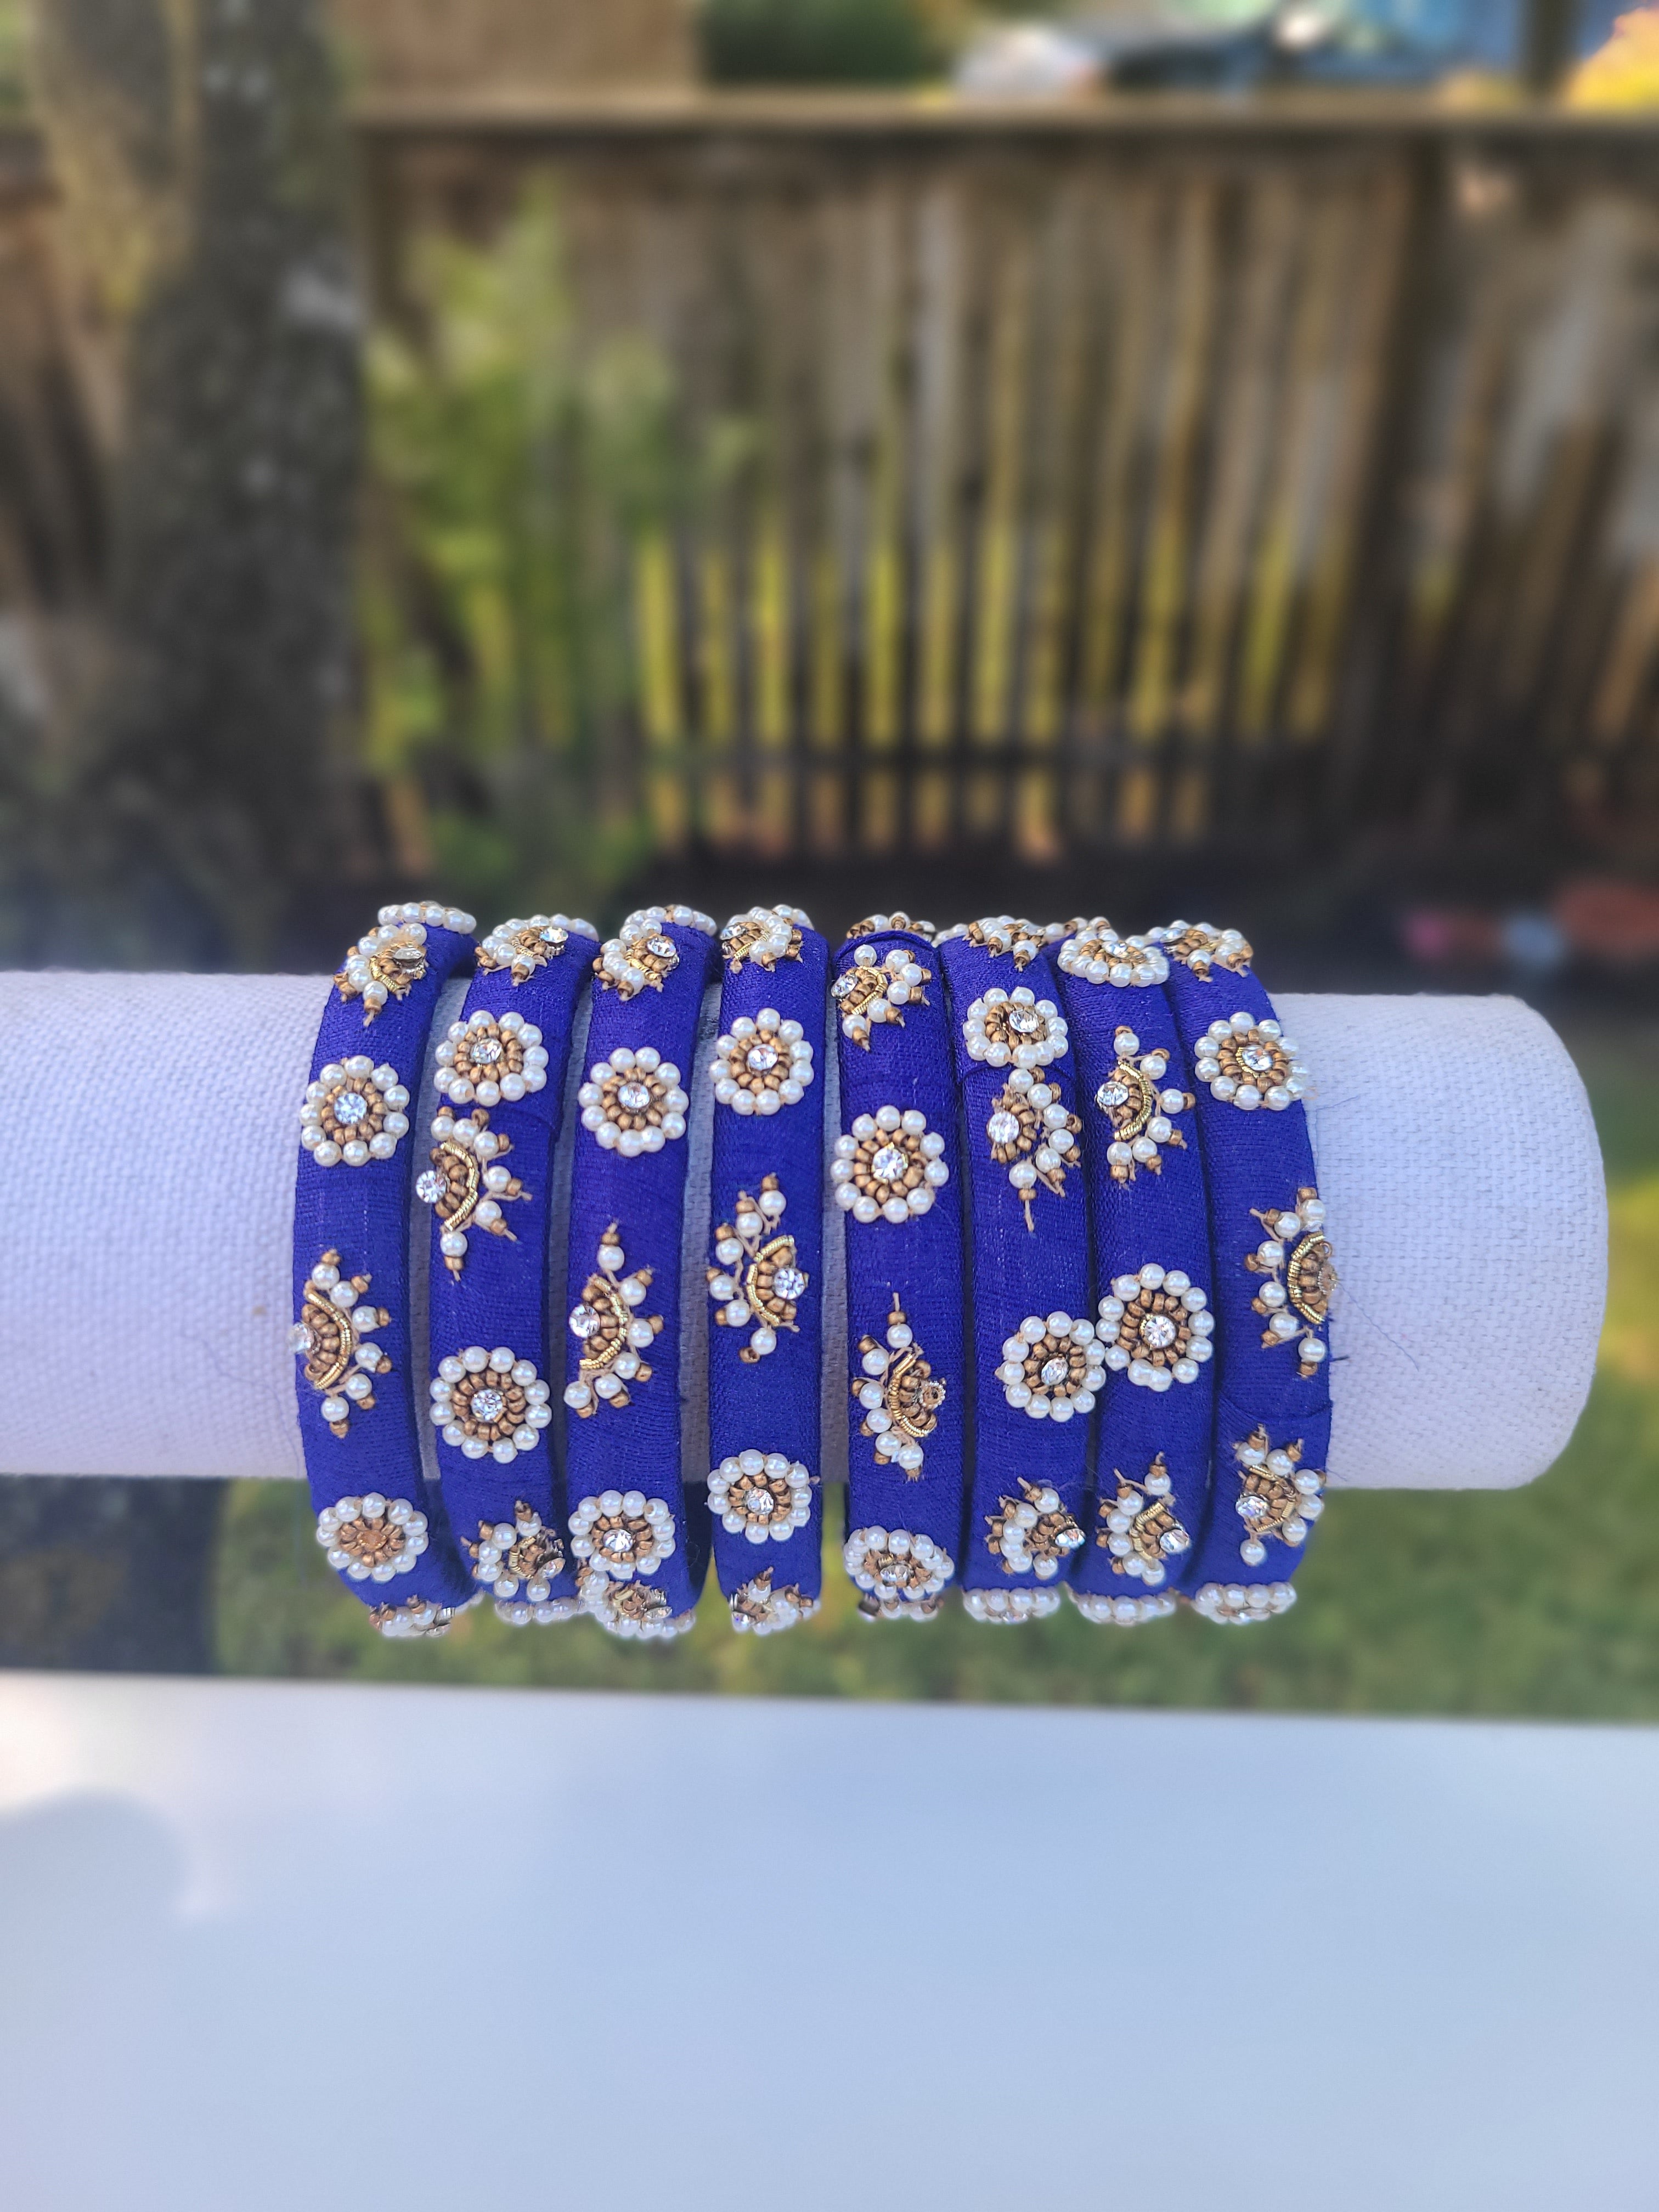 Blue fabric embroidery bangles